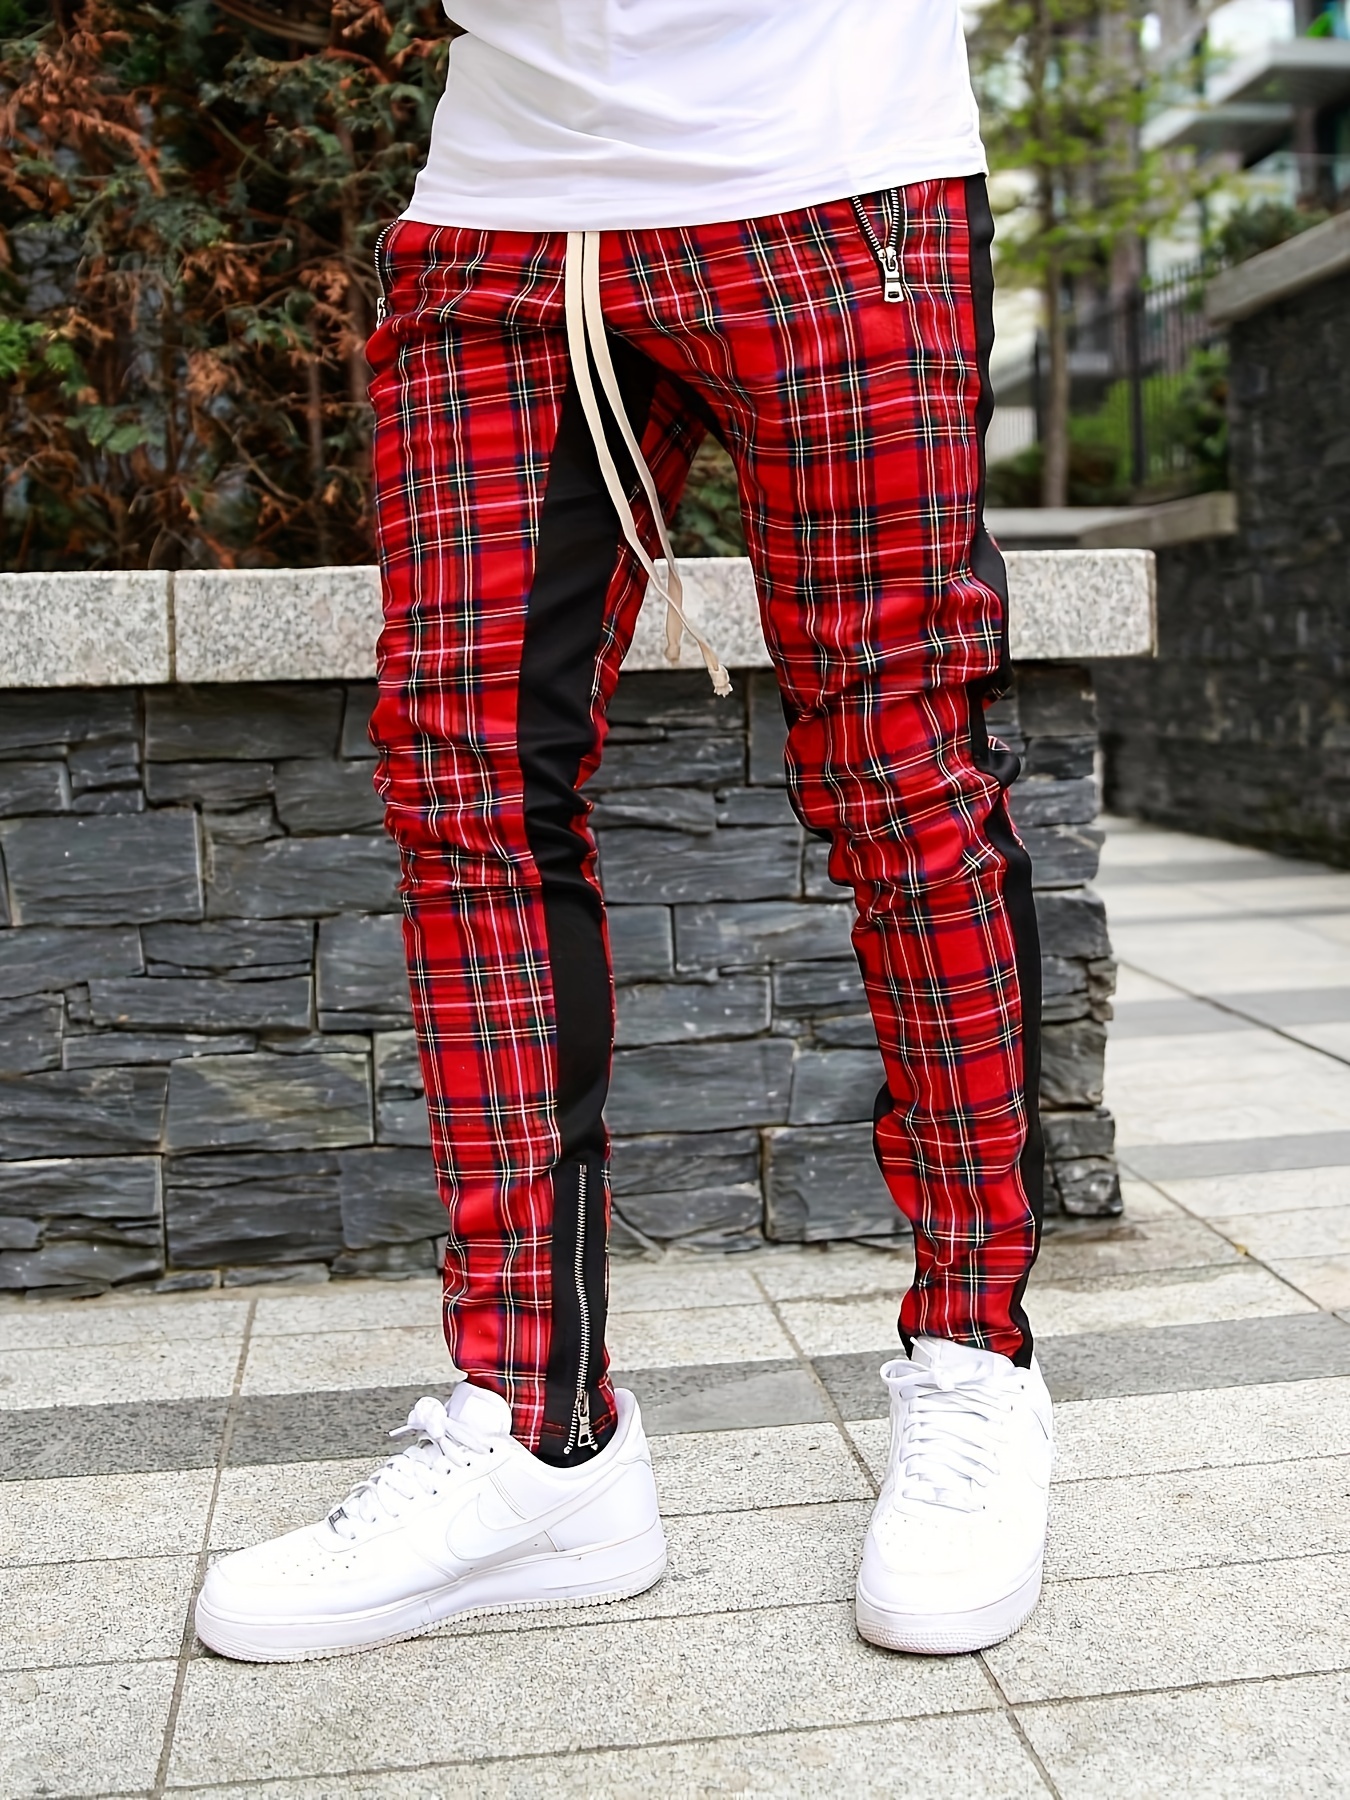 What are comfortable casual pants/trousers for men that are not